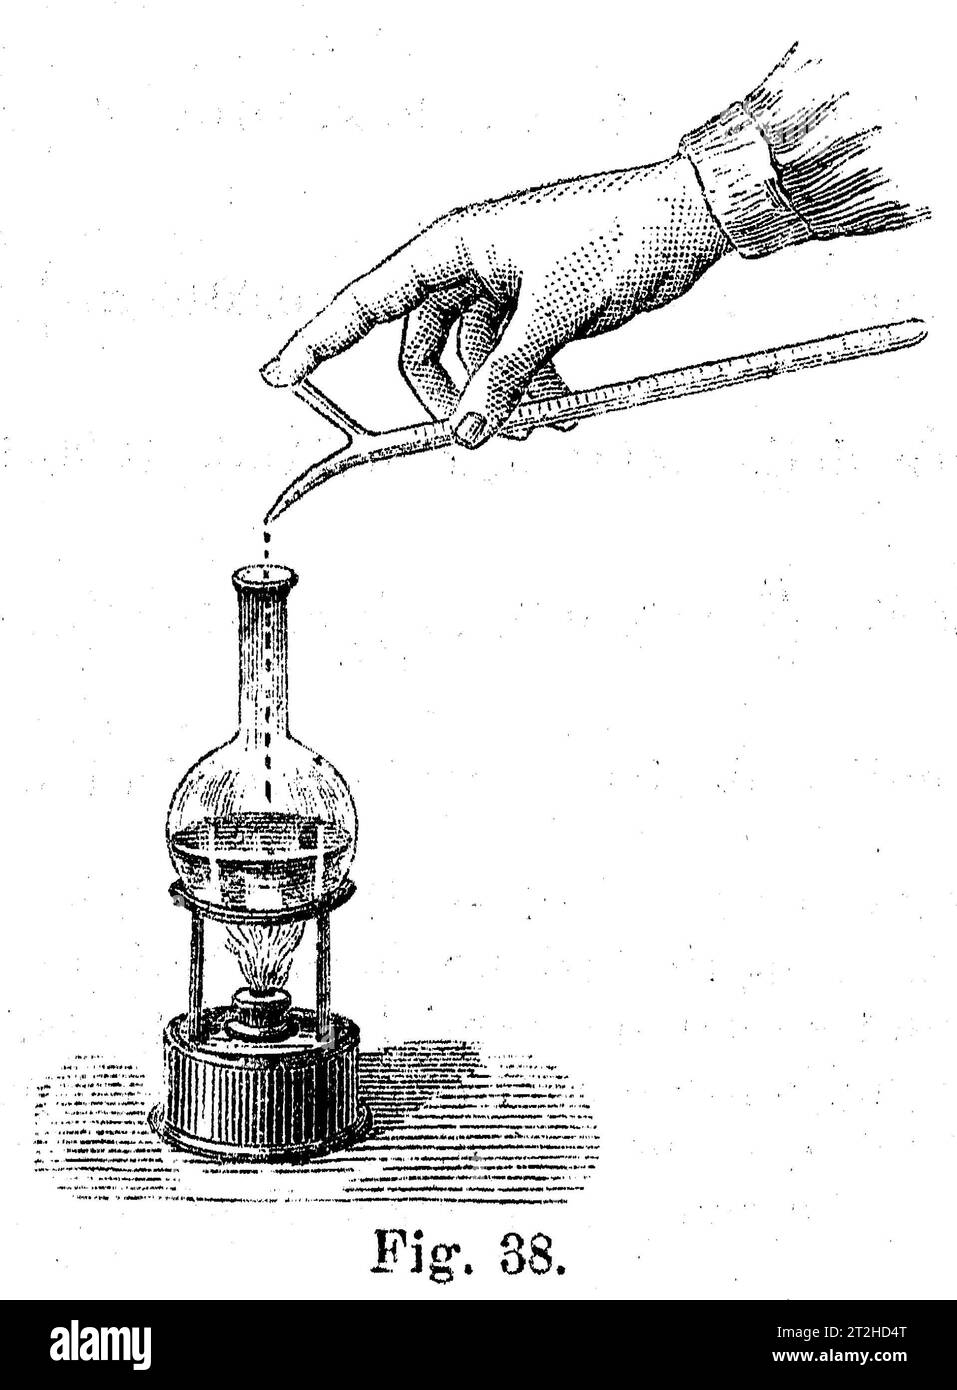 Hot titration with an english-style burette (Alessandri 1895.38) Stock Photo